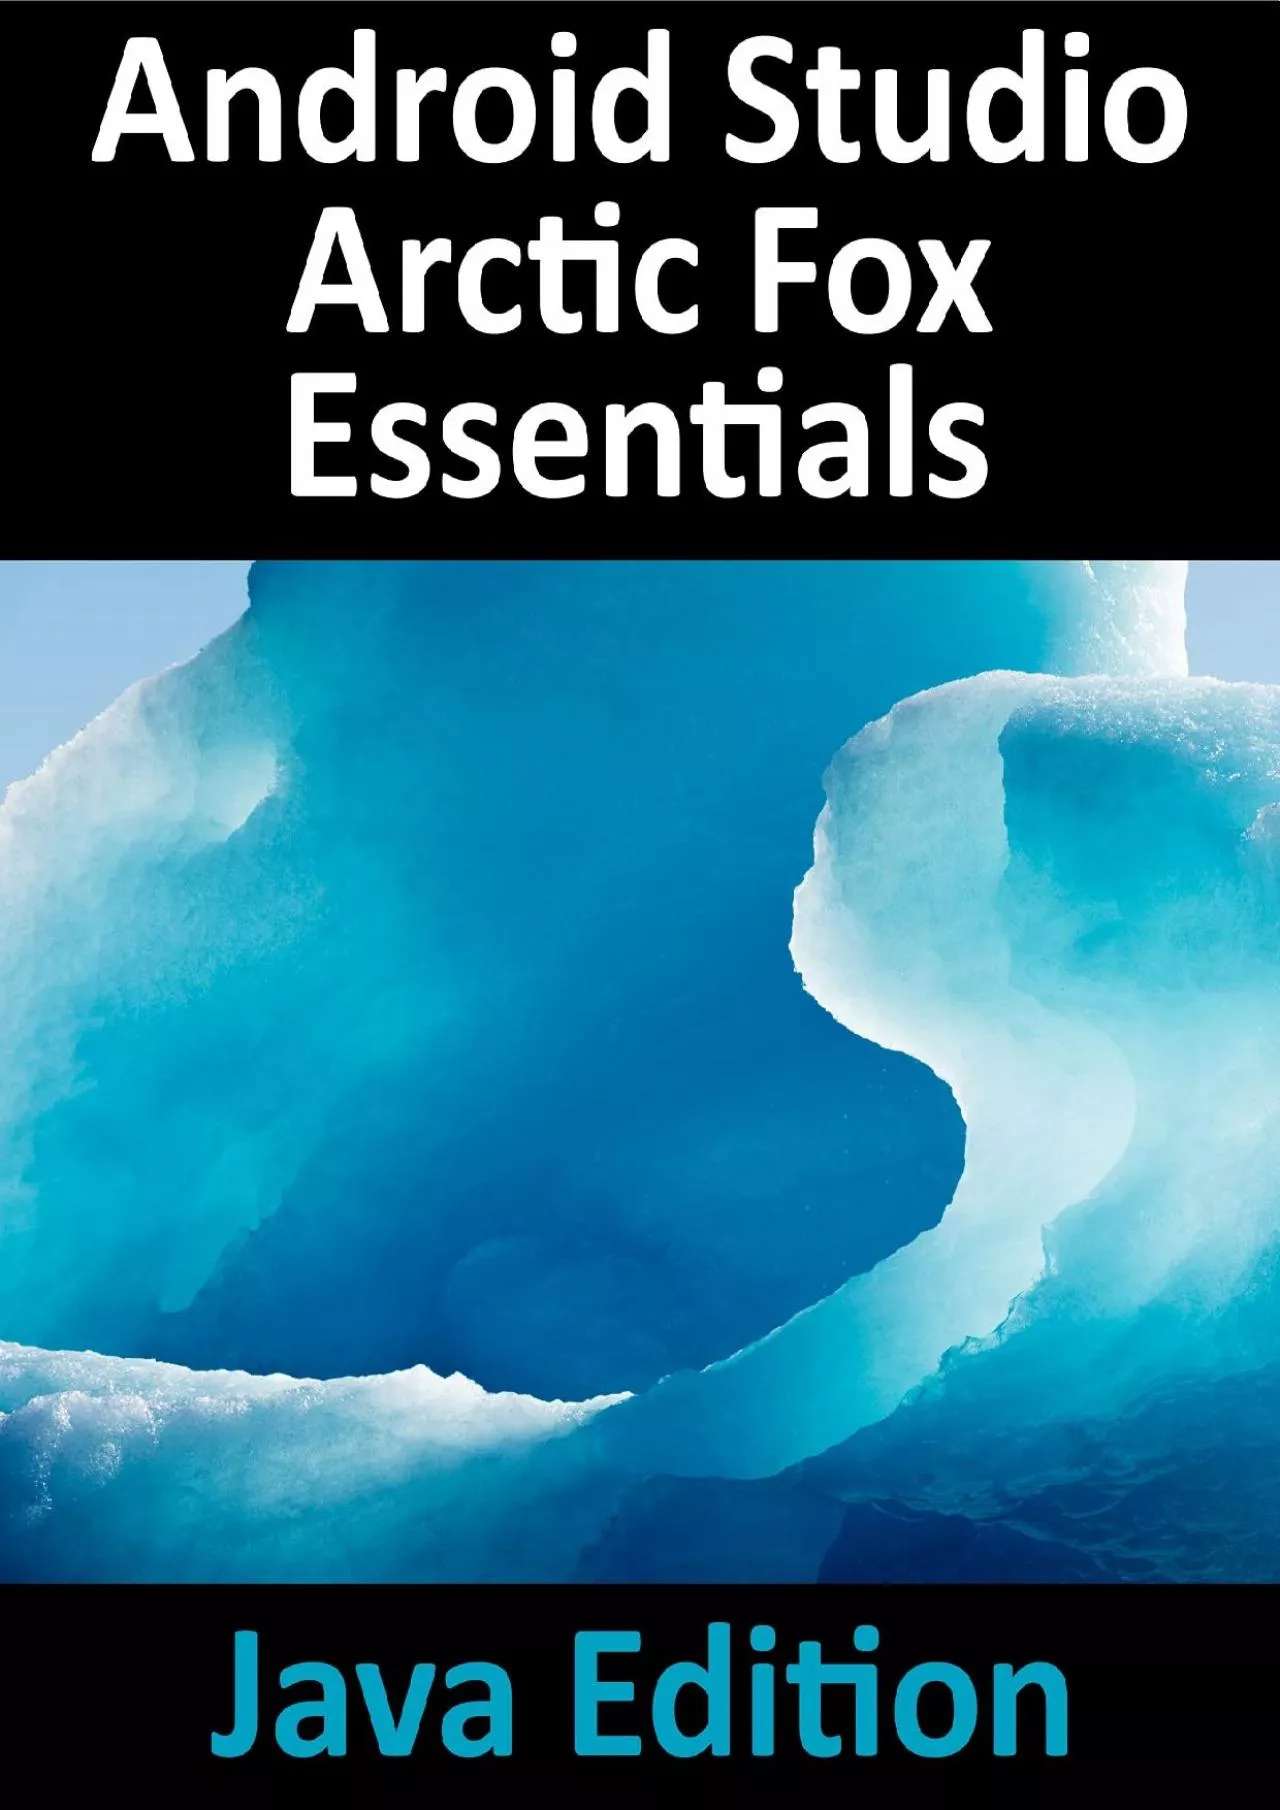 [READ]-Android Studio Arctic Fox Essentials - Java Edition: Developing Android Apps Using